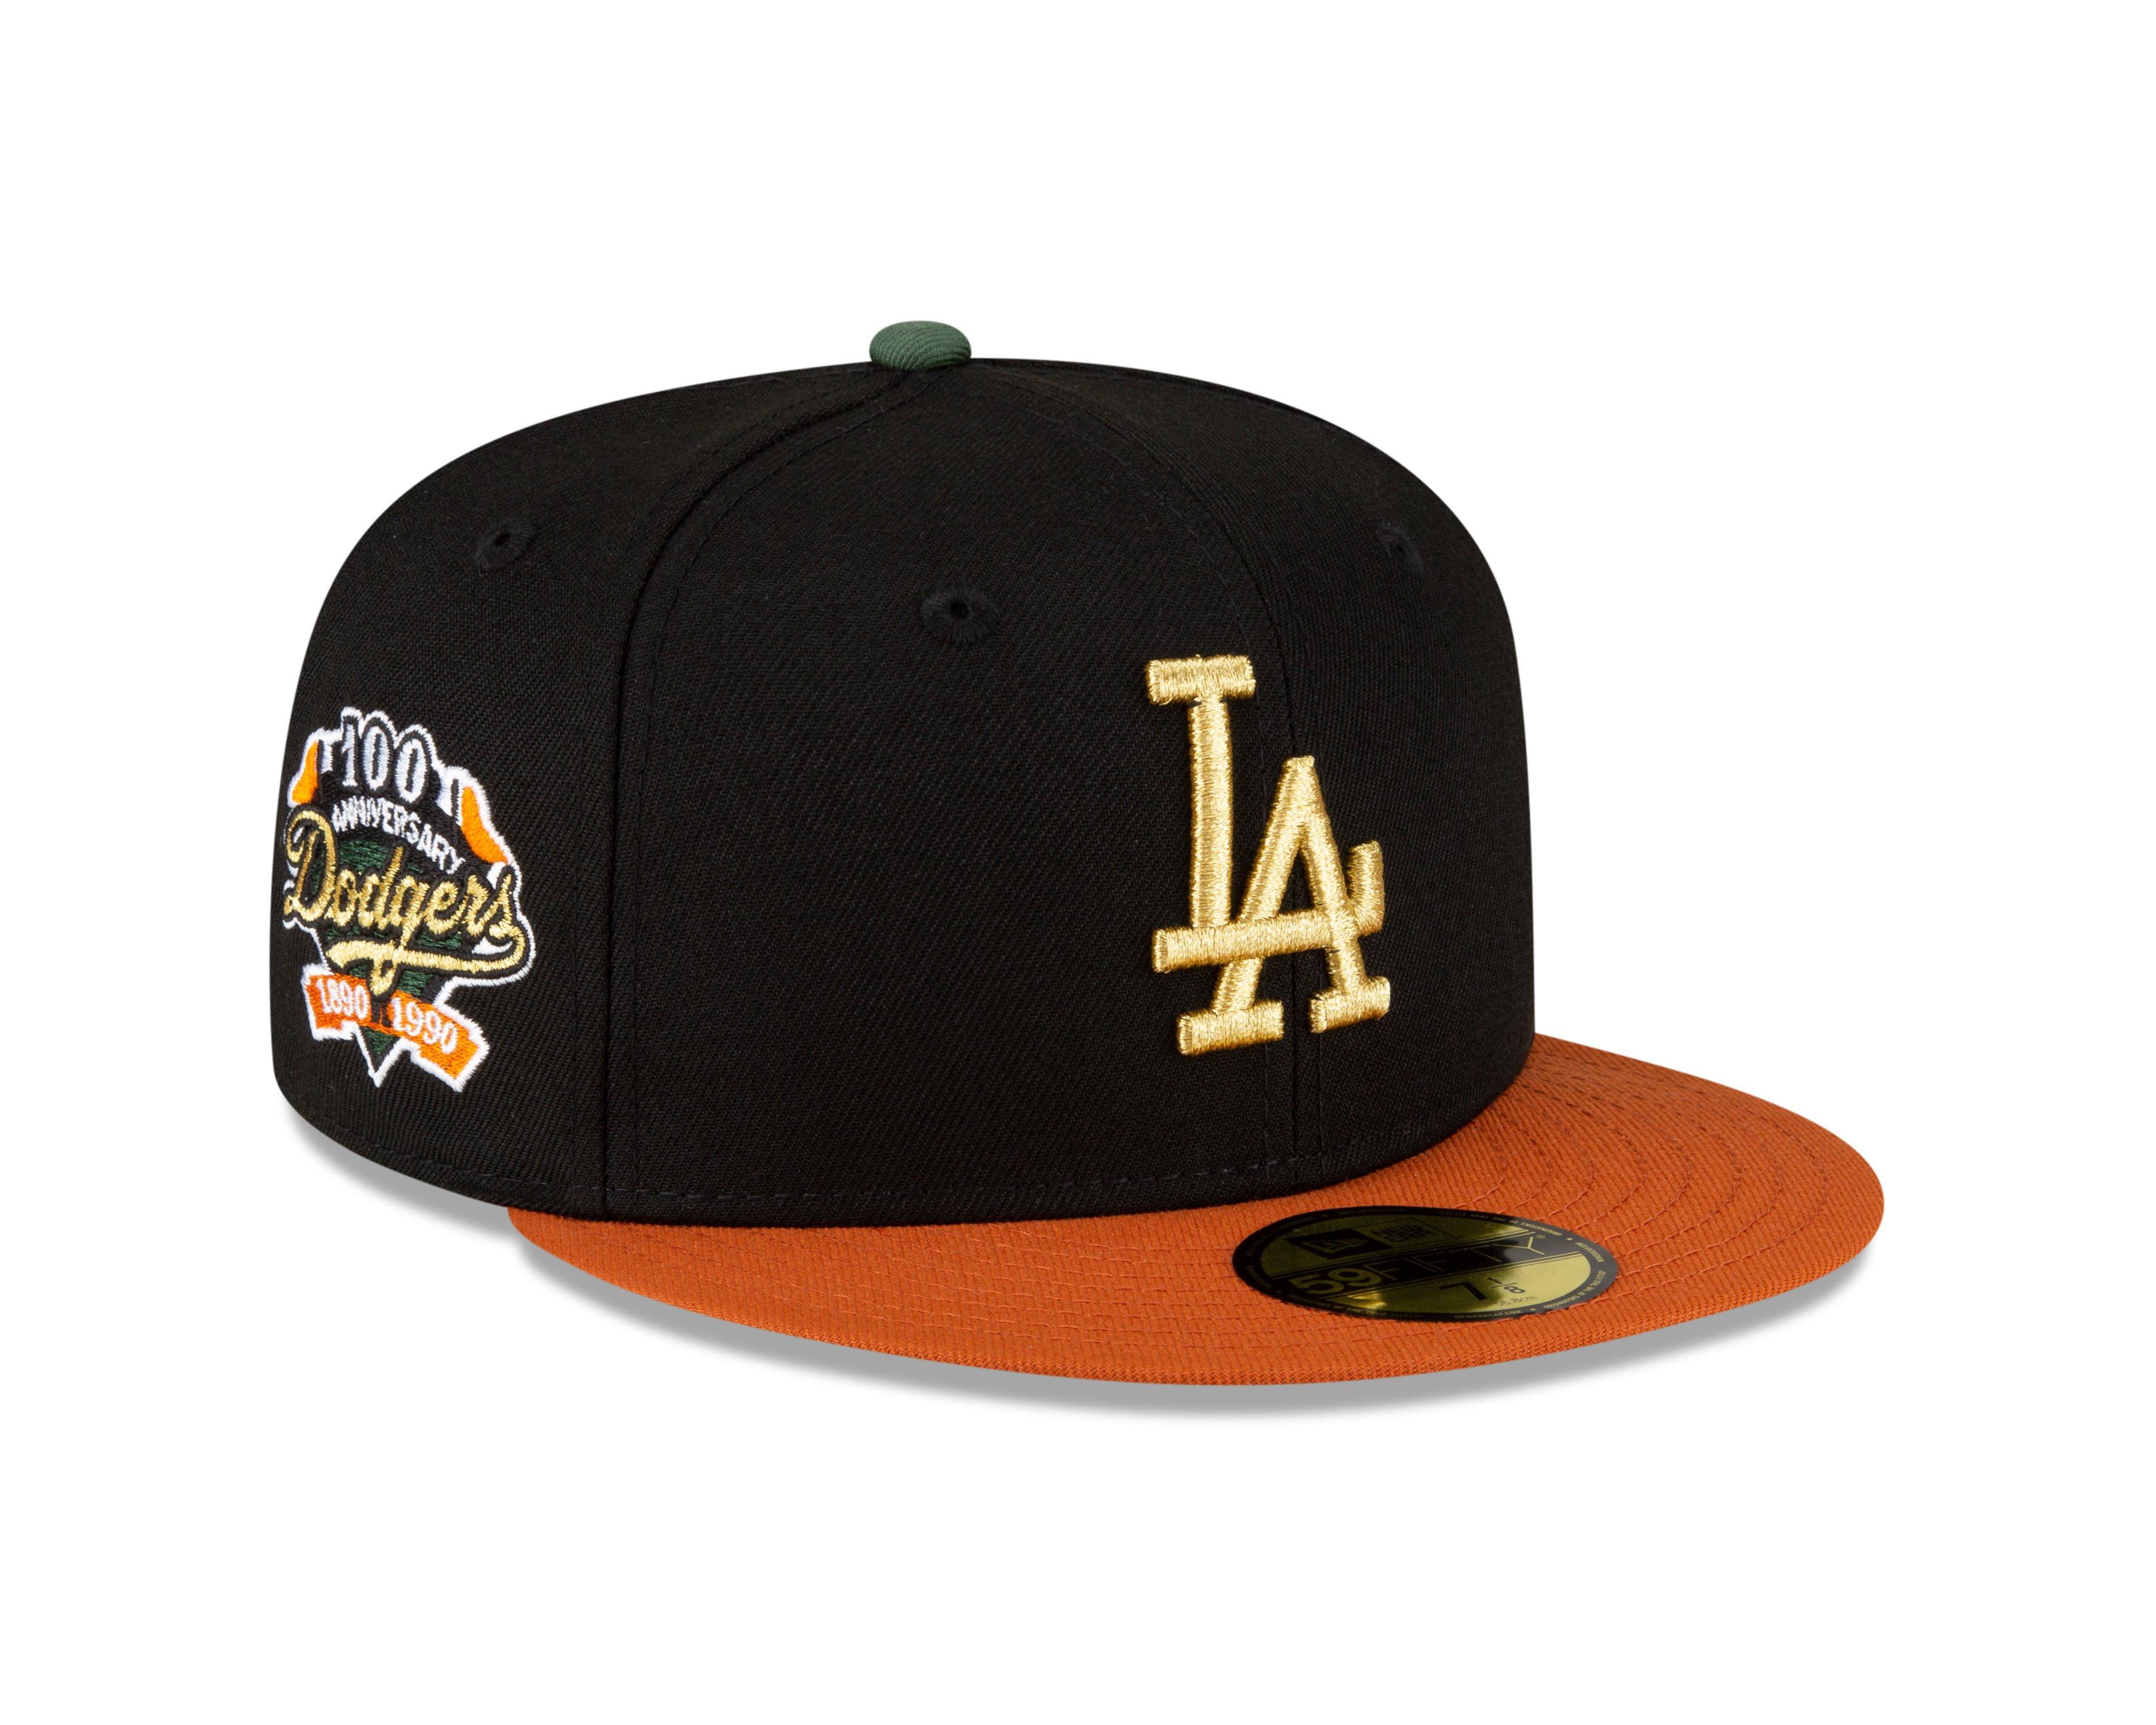 Los Angeles Dodgers 100TH ANNIVERSARY MESH-BACK SIDE-PATCH Black